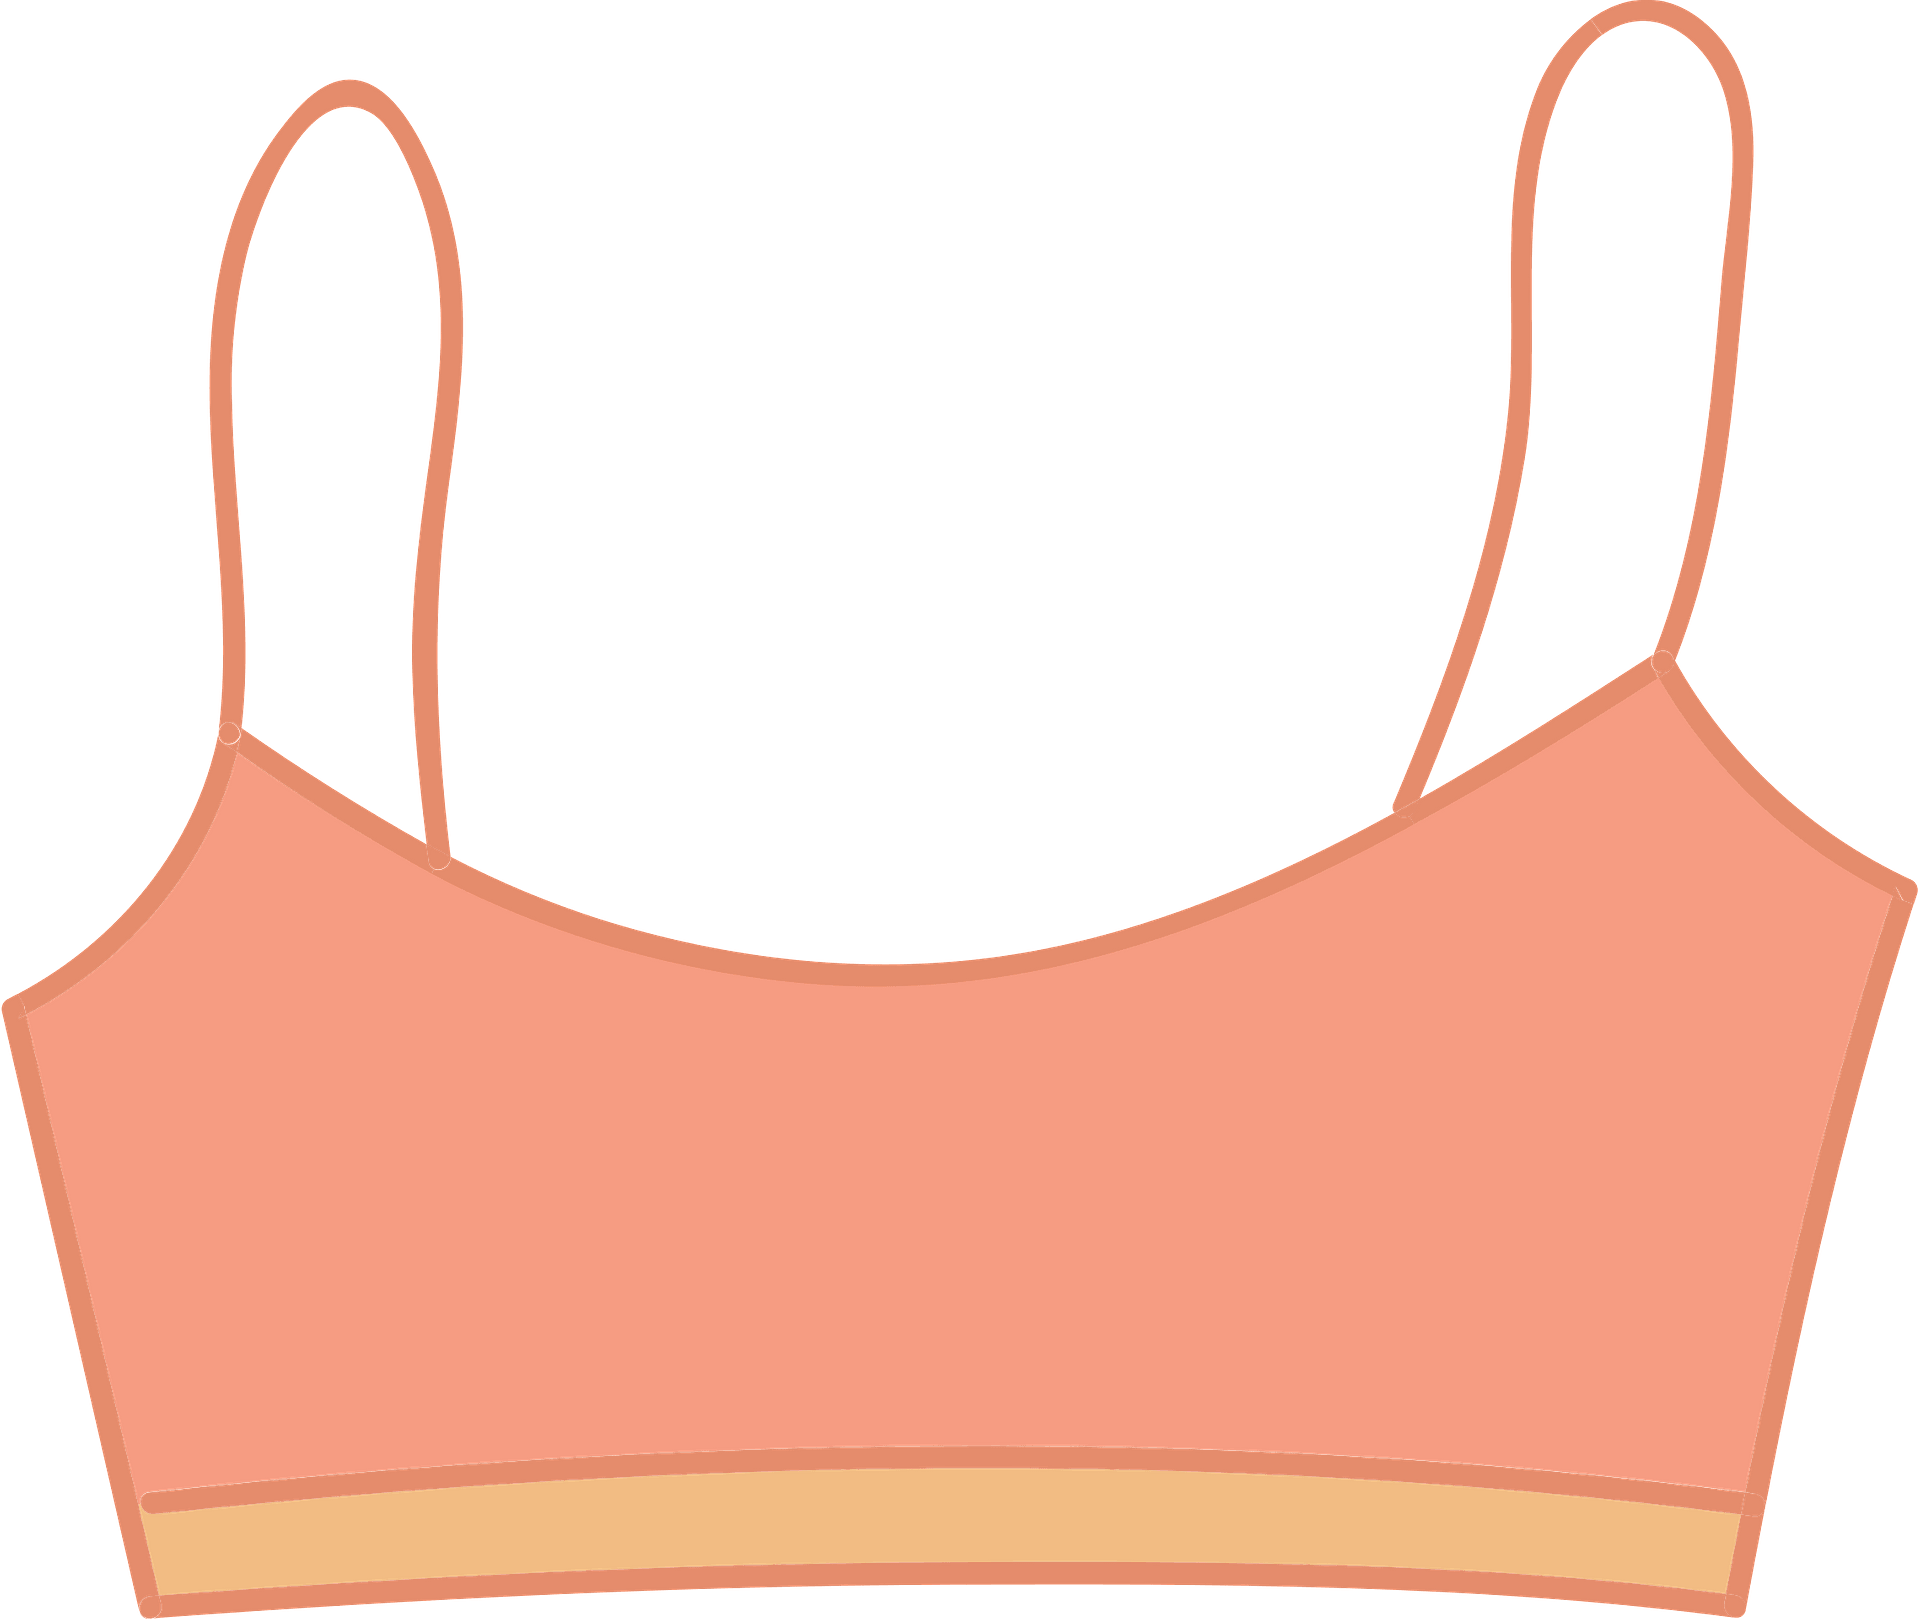 Pink Bra Transparent Png Clipart Free - Brassiere,Bra Png - free